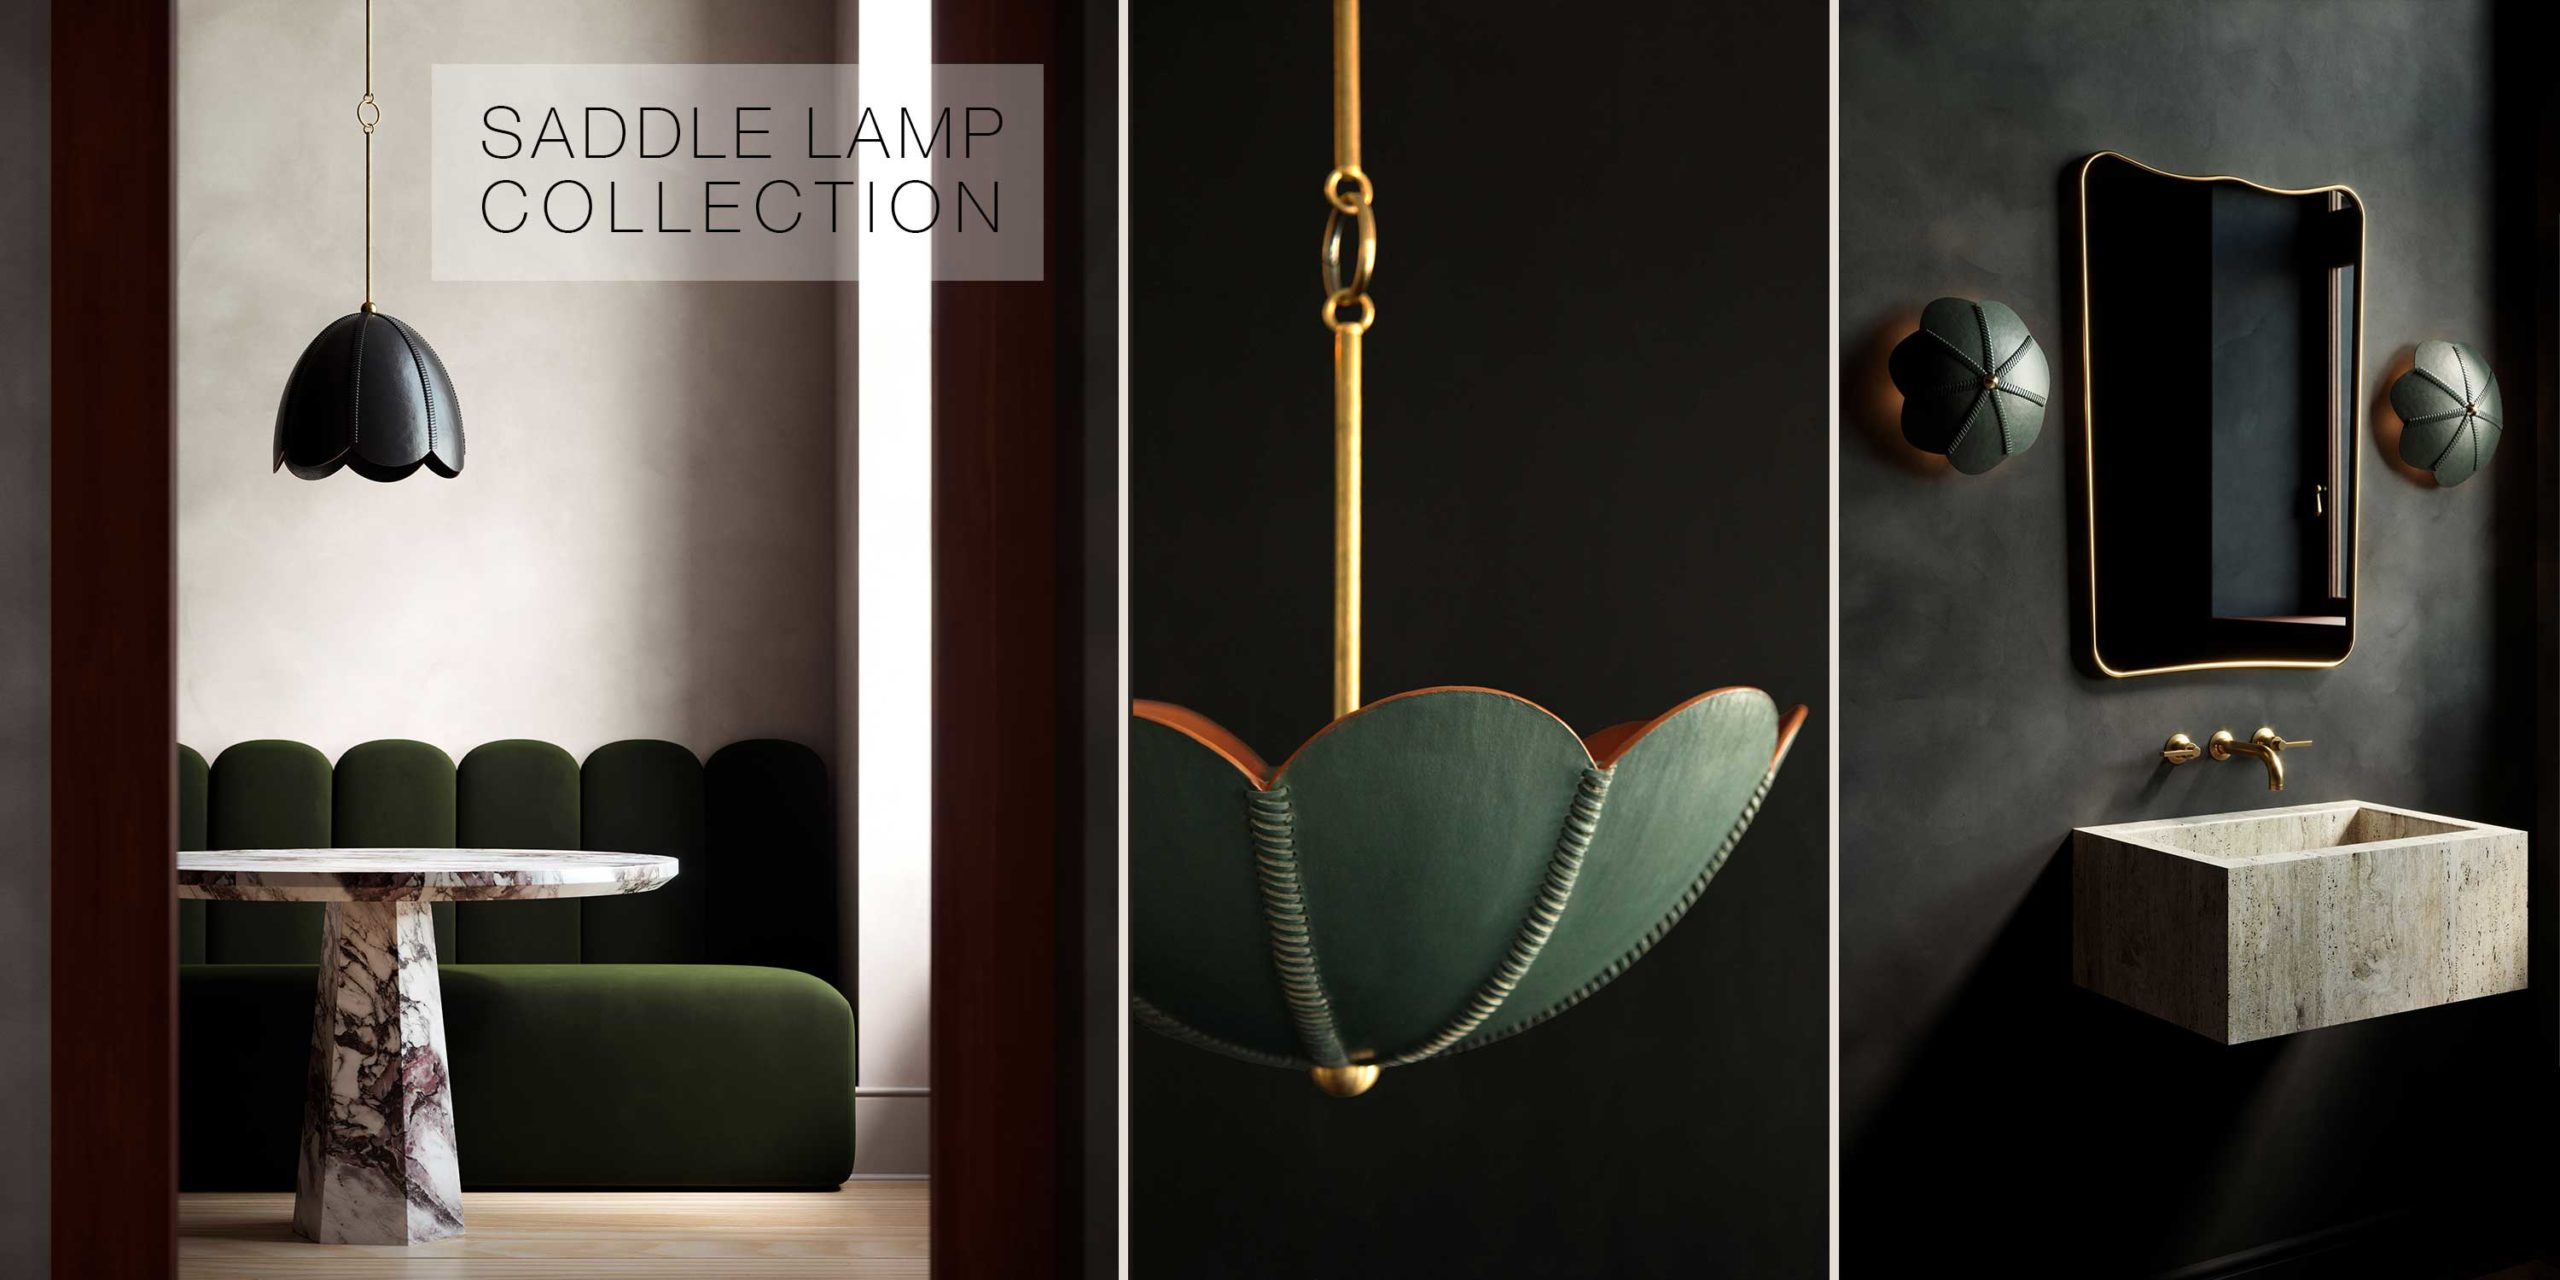 Talabartero Collection Saddle Lamps, leather pendant lights and sconces